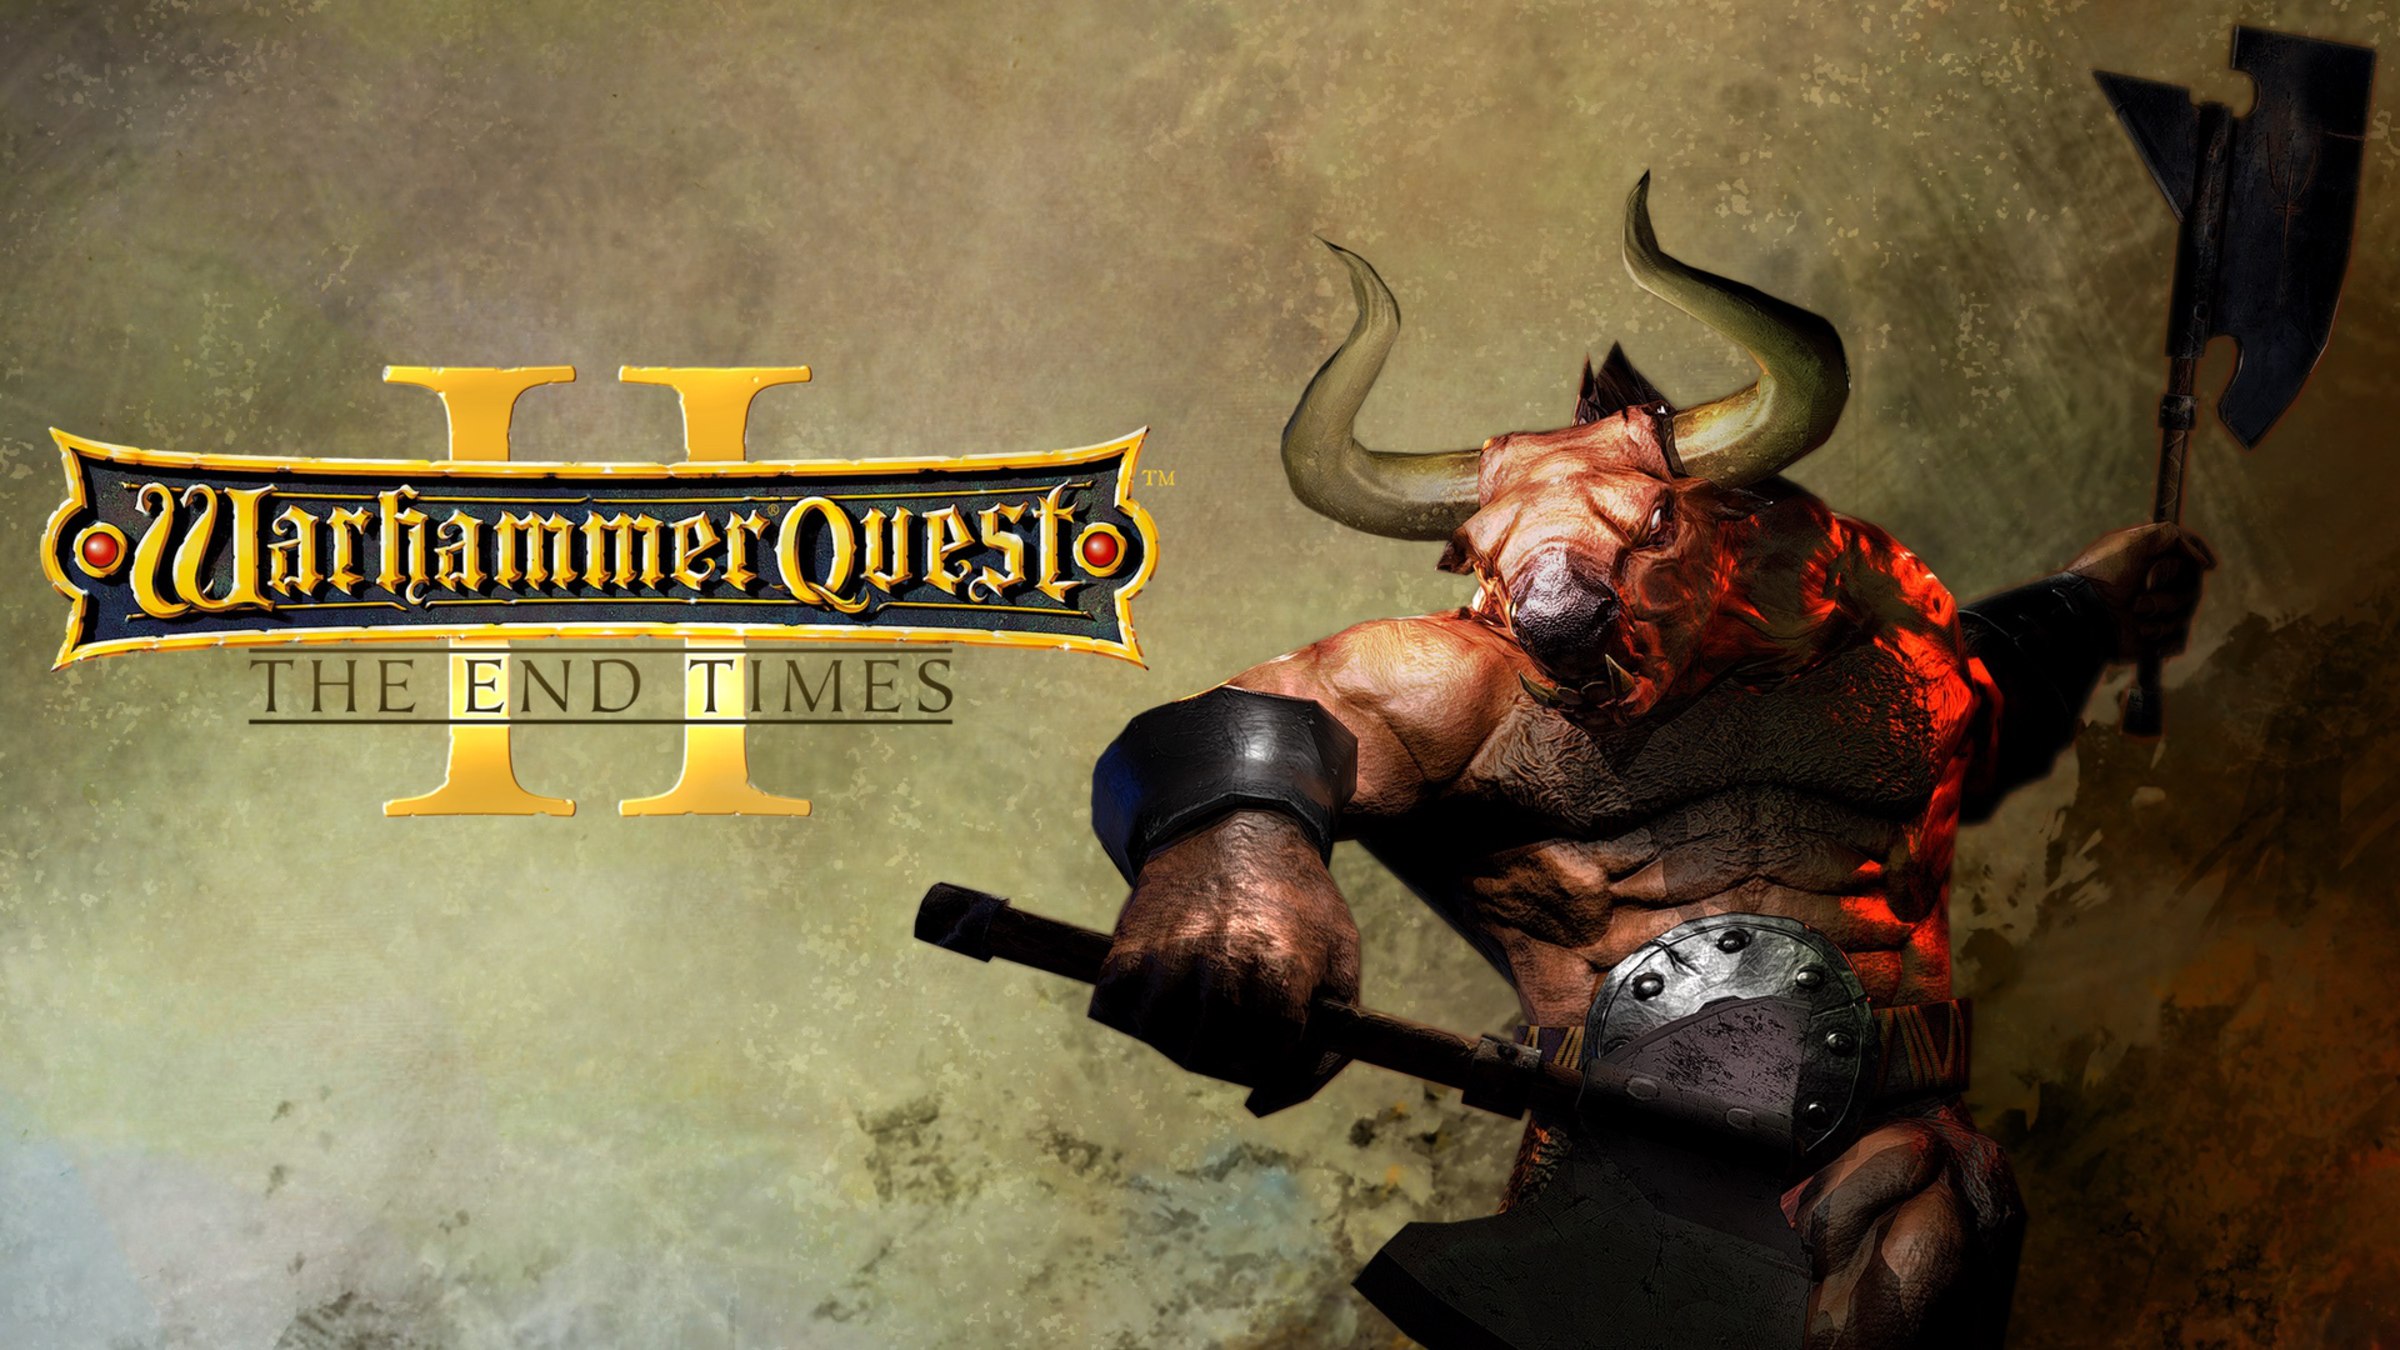 Warhammer quest 2. Warhammer Quest 2: the end times. Warhammer end times. End of time. Warhammer Quest 2: the end times ps4.